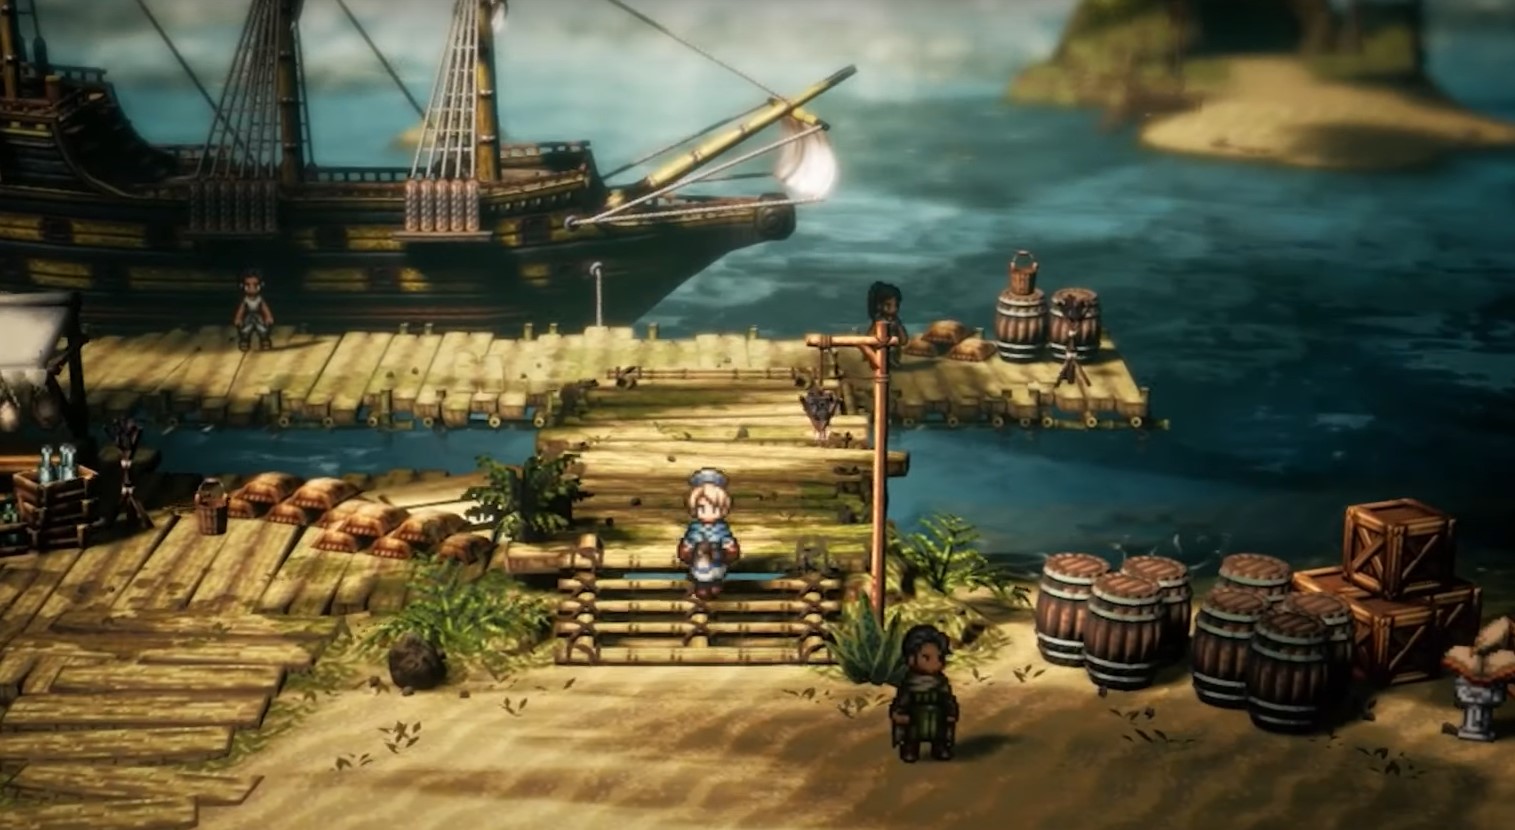 Beneath the wall Octopath Traveler 2 boss fight explained walking from ferry port